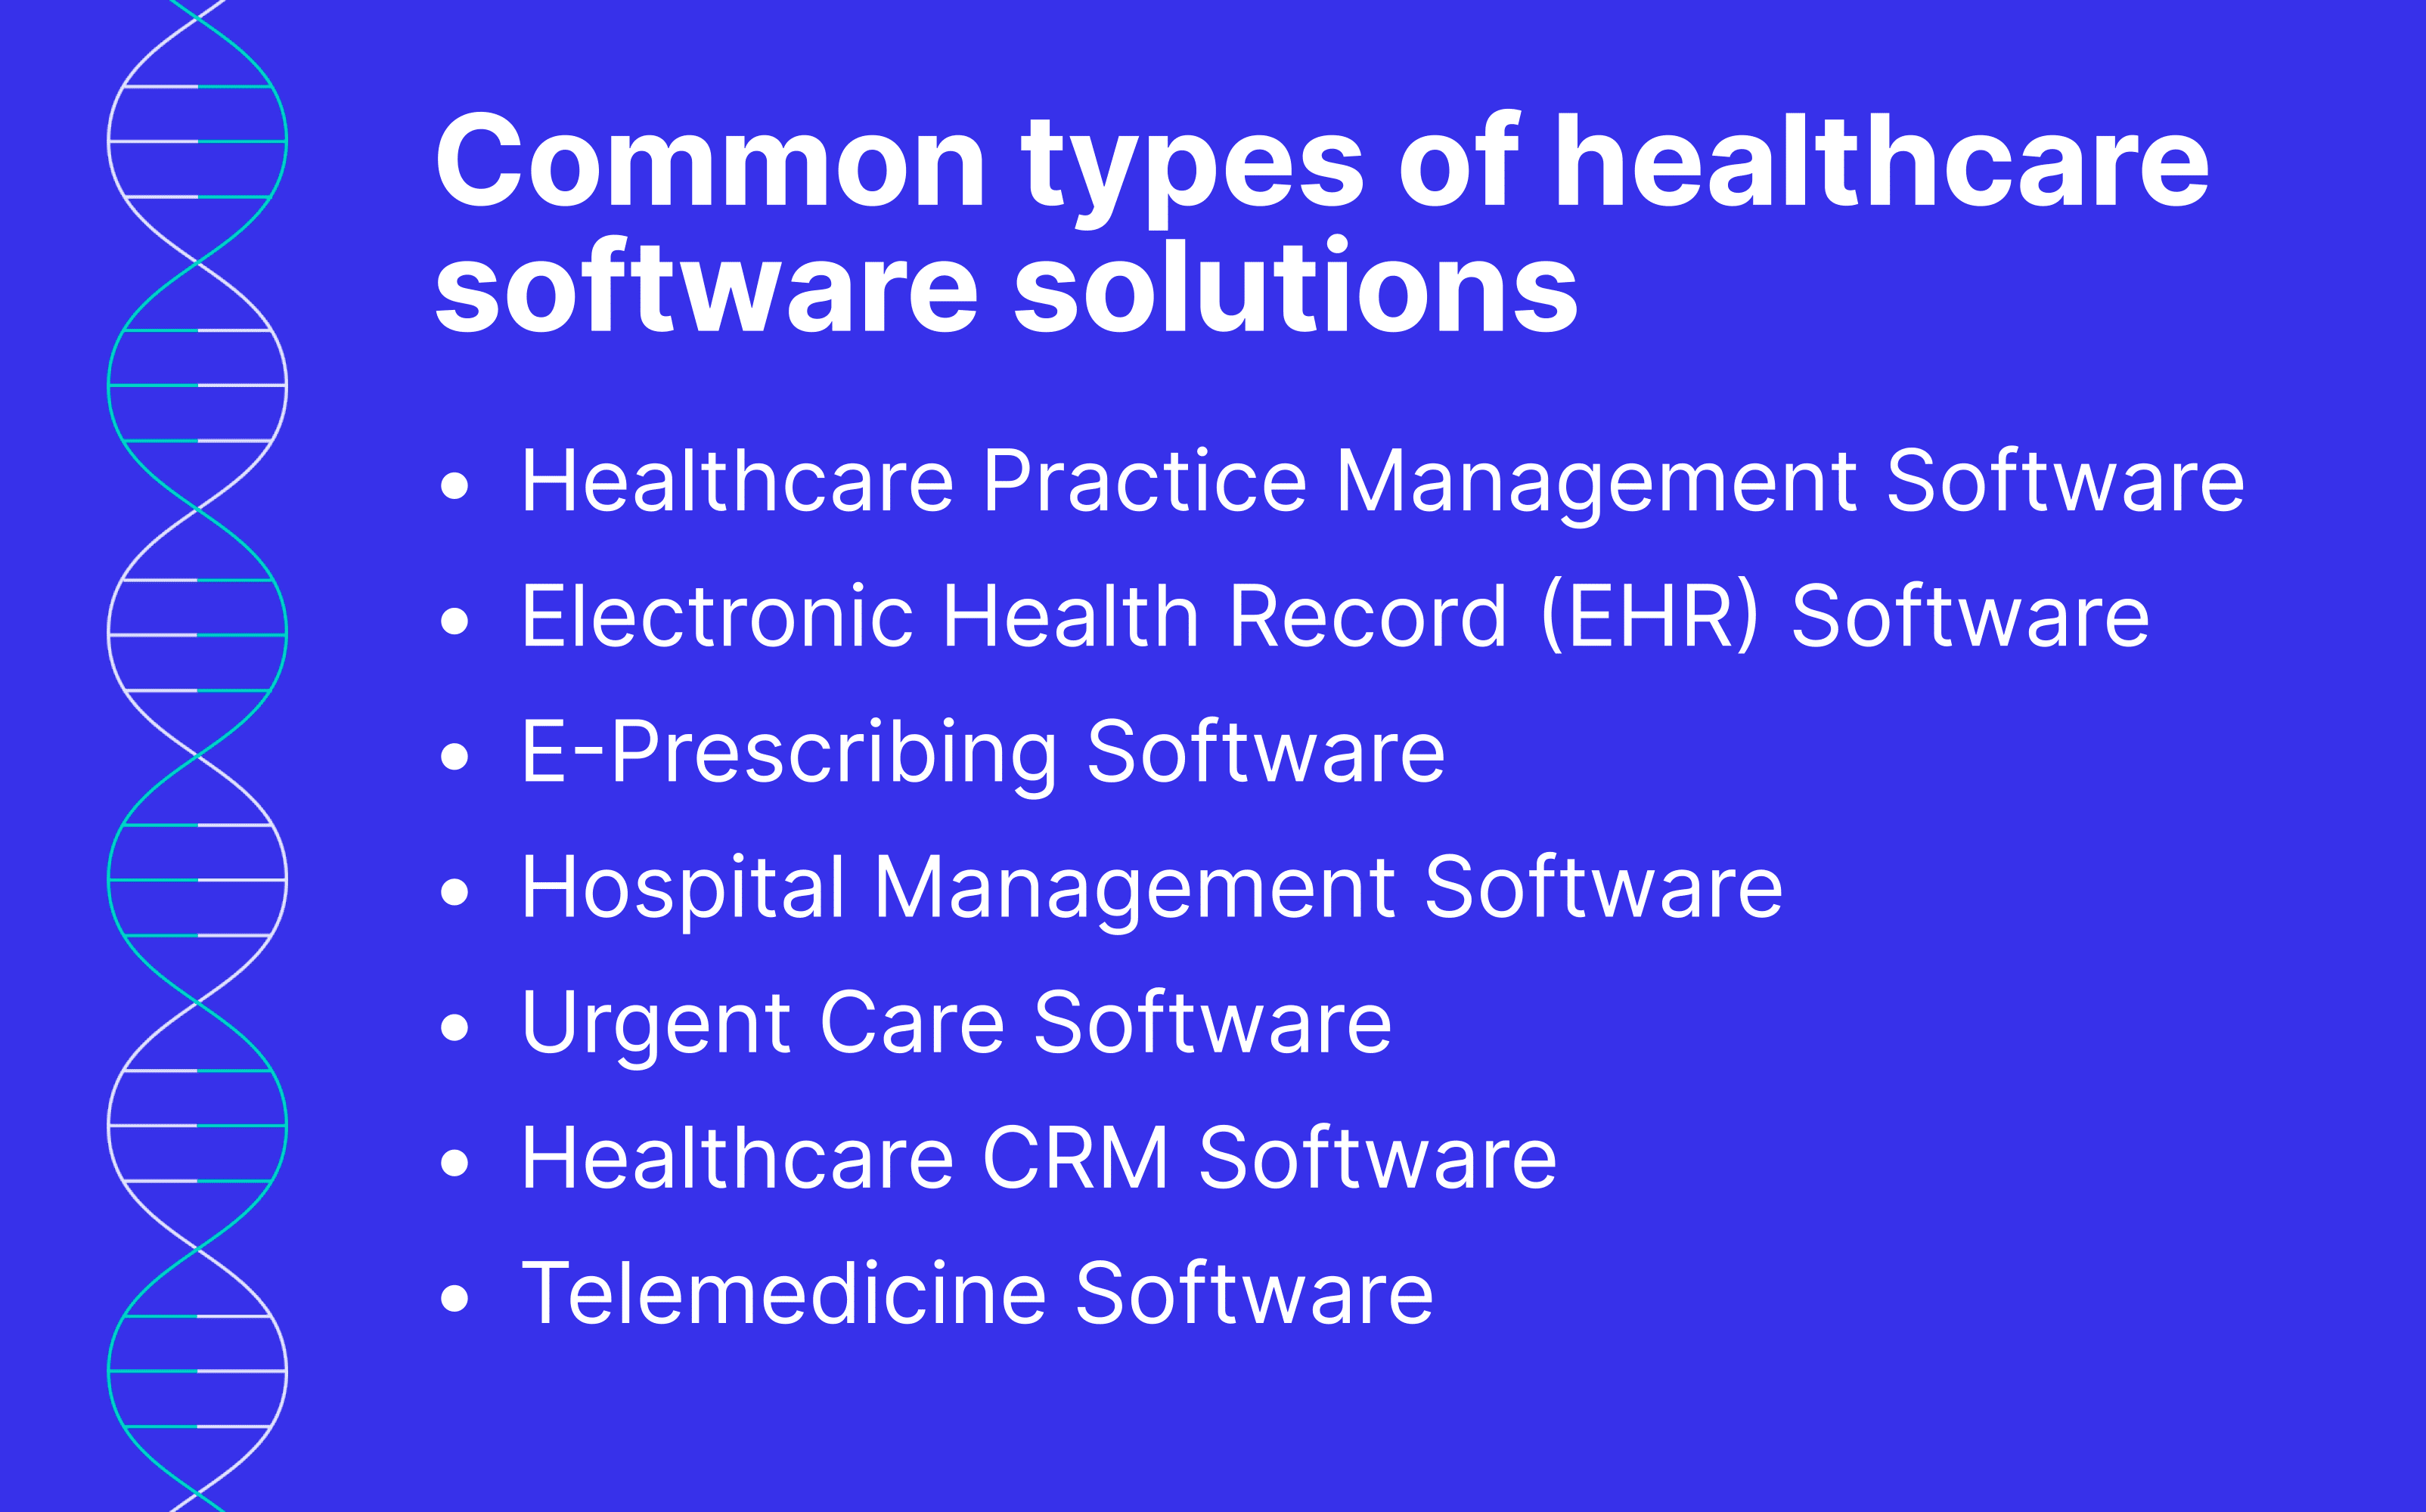 Common types of Healthcare Software solutions